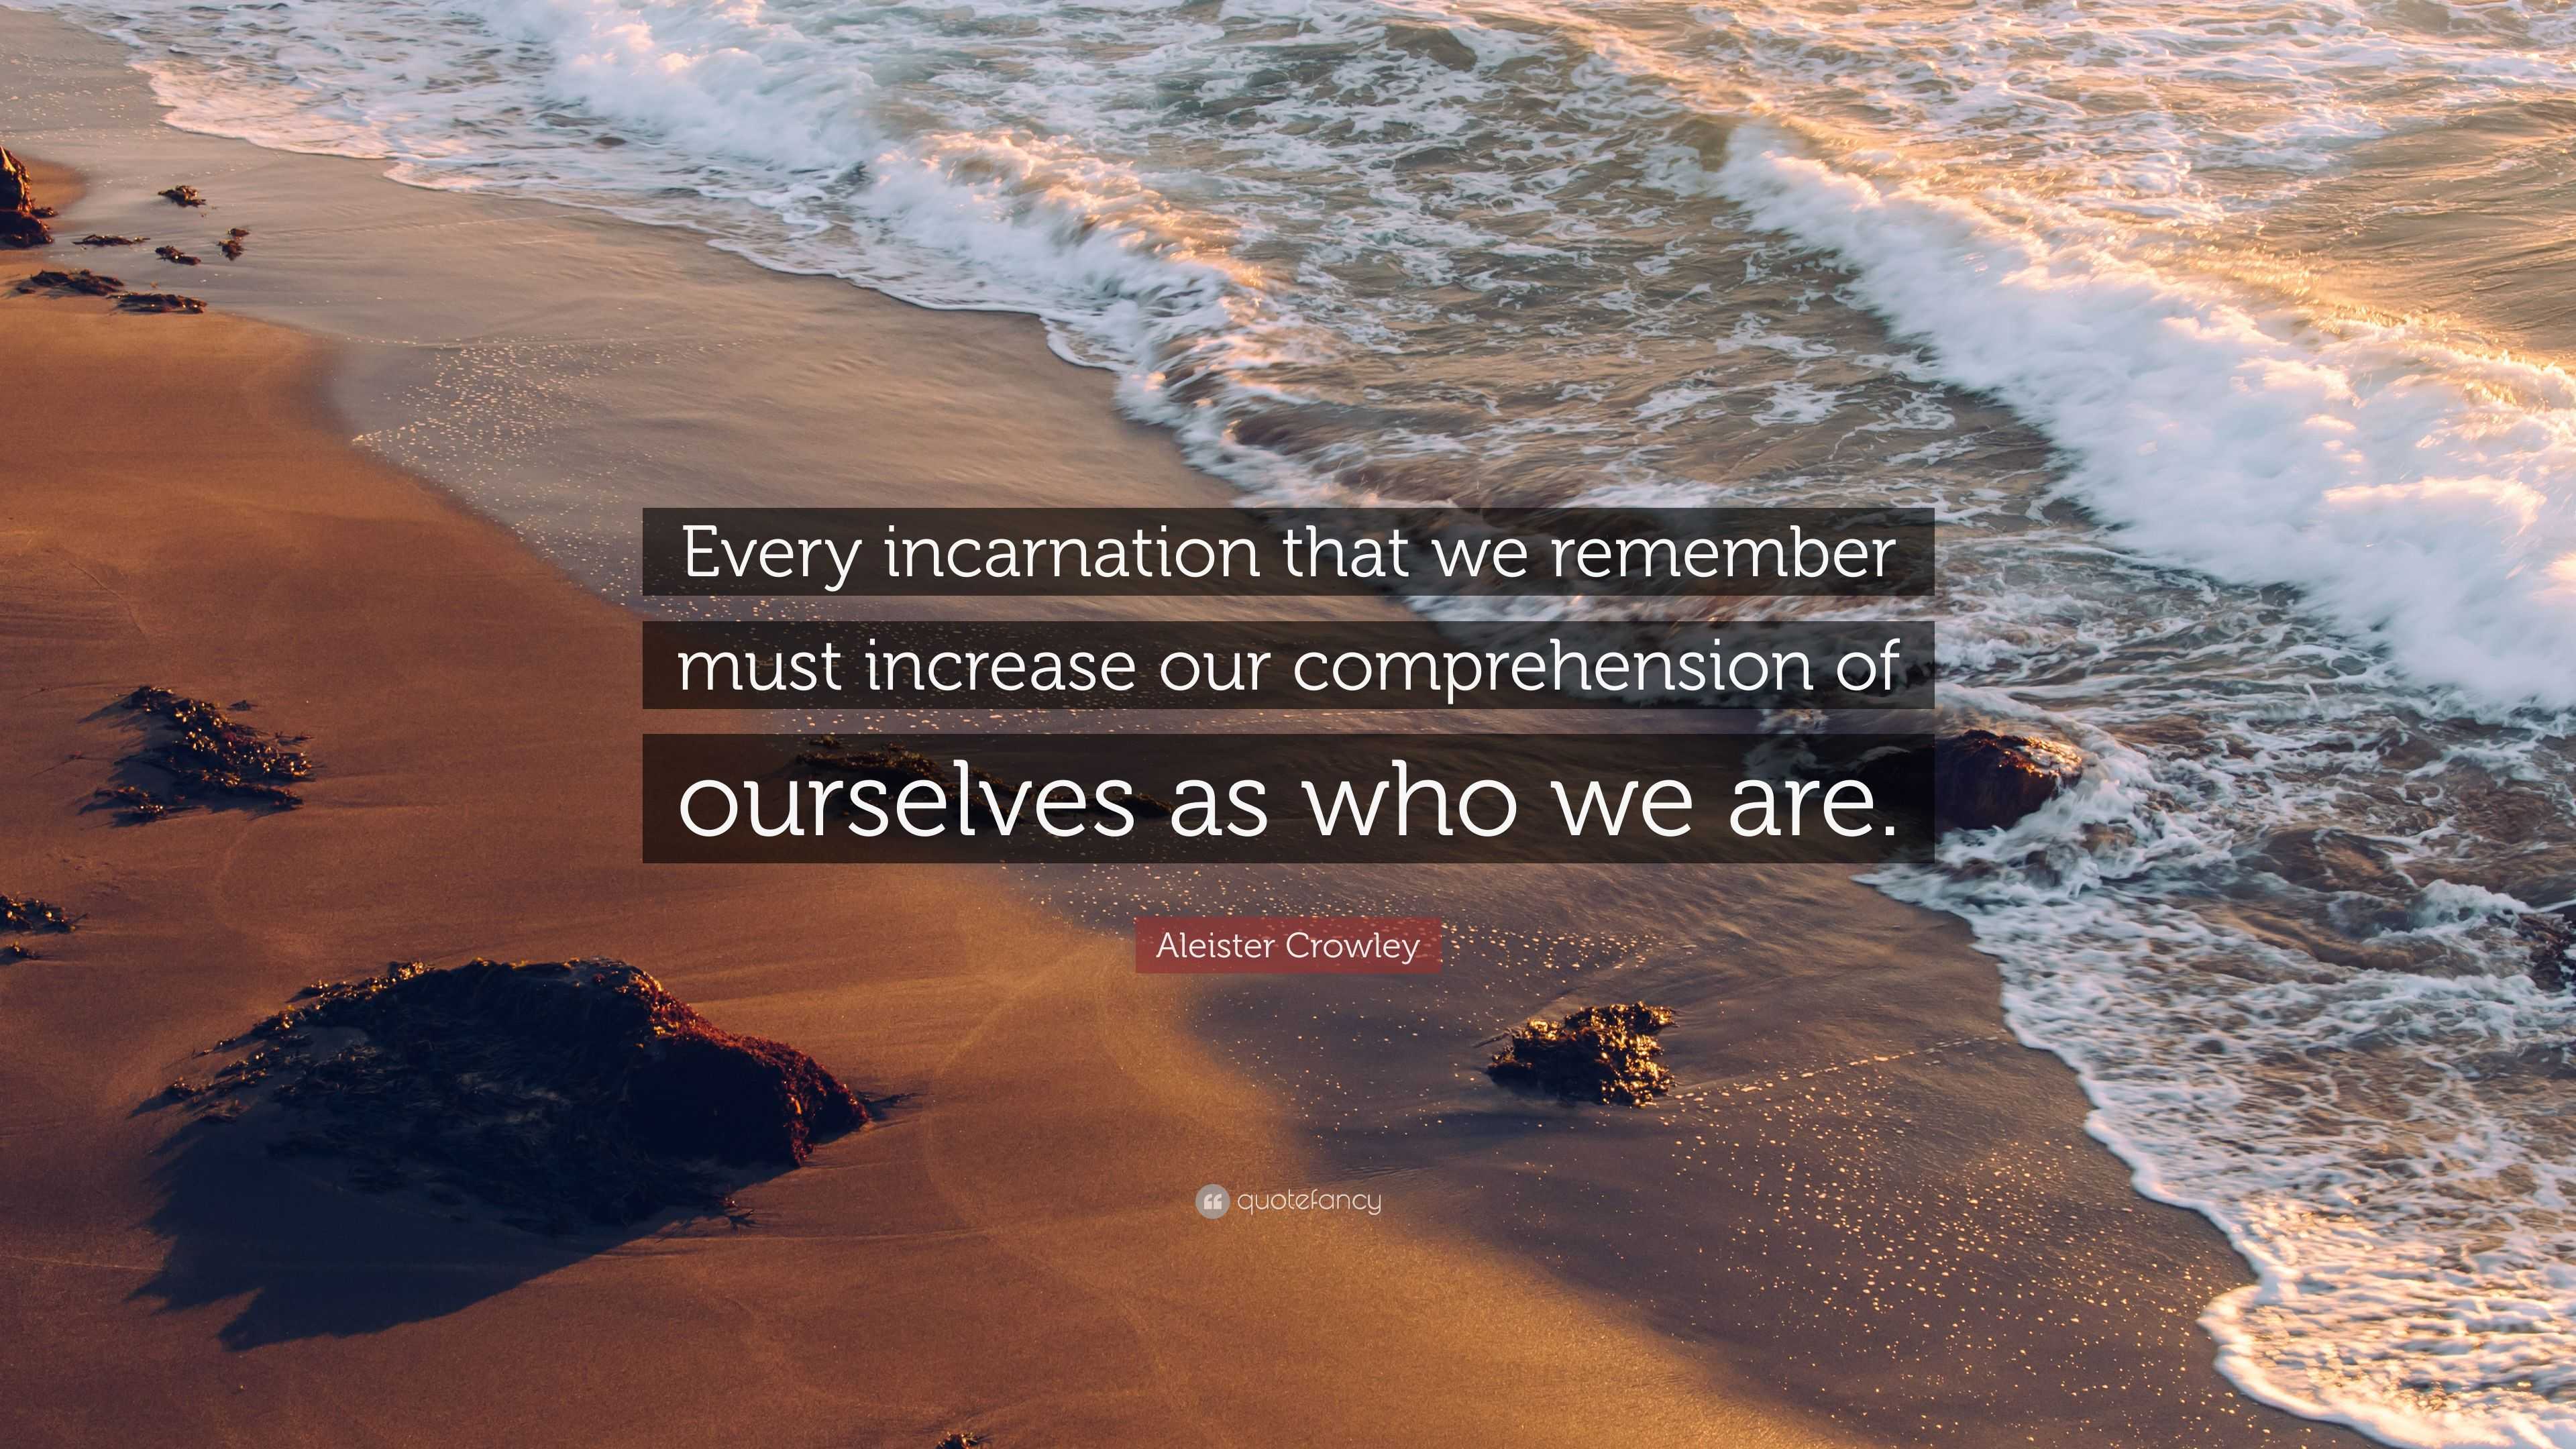 Aleister Crowley Quote: “Every incarnation that we remember must ...